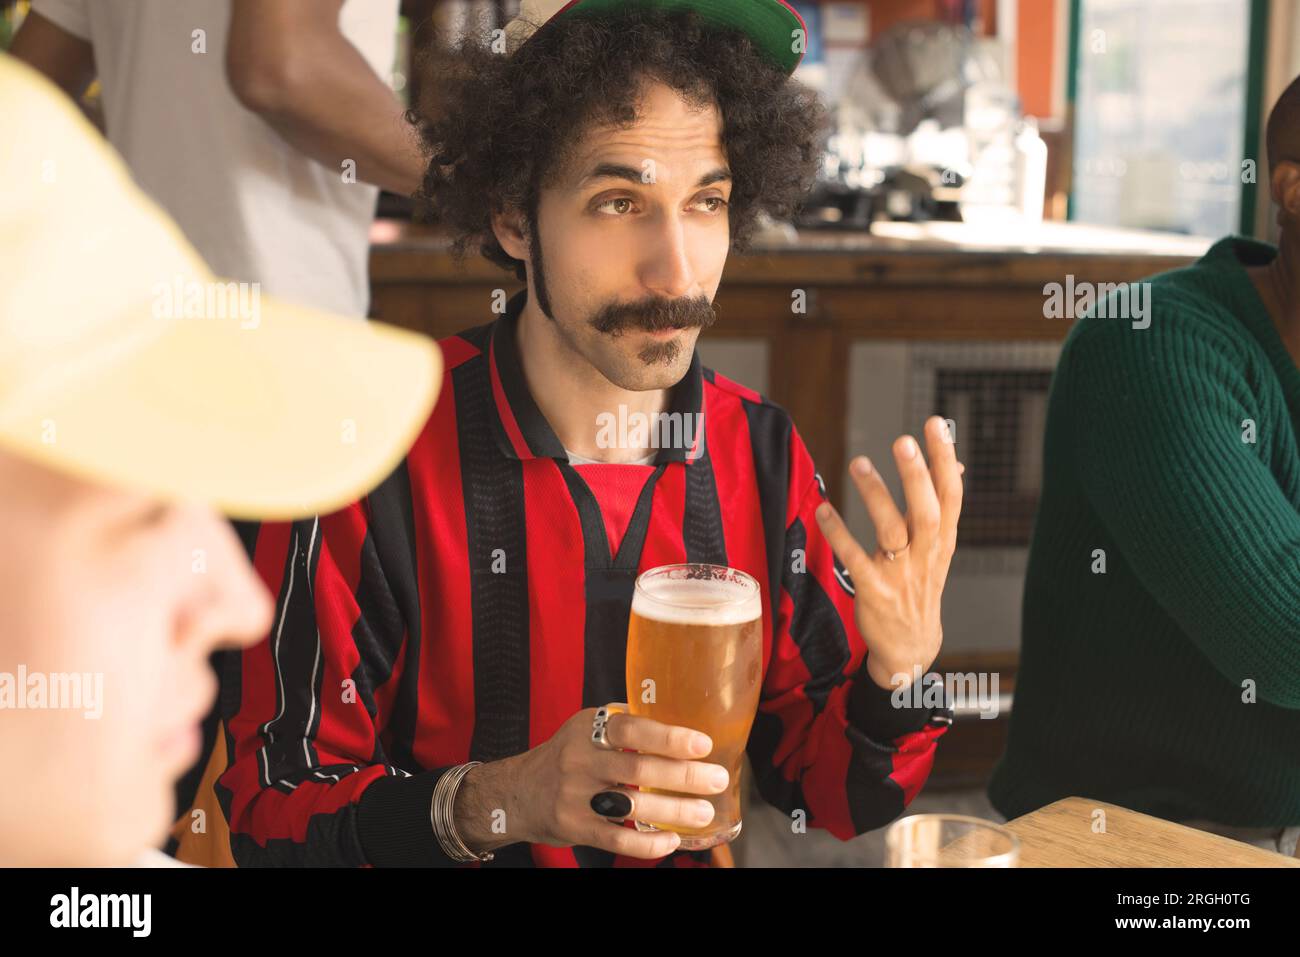 Man with a mustache holding a beer glass at a bar Stock Photo